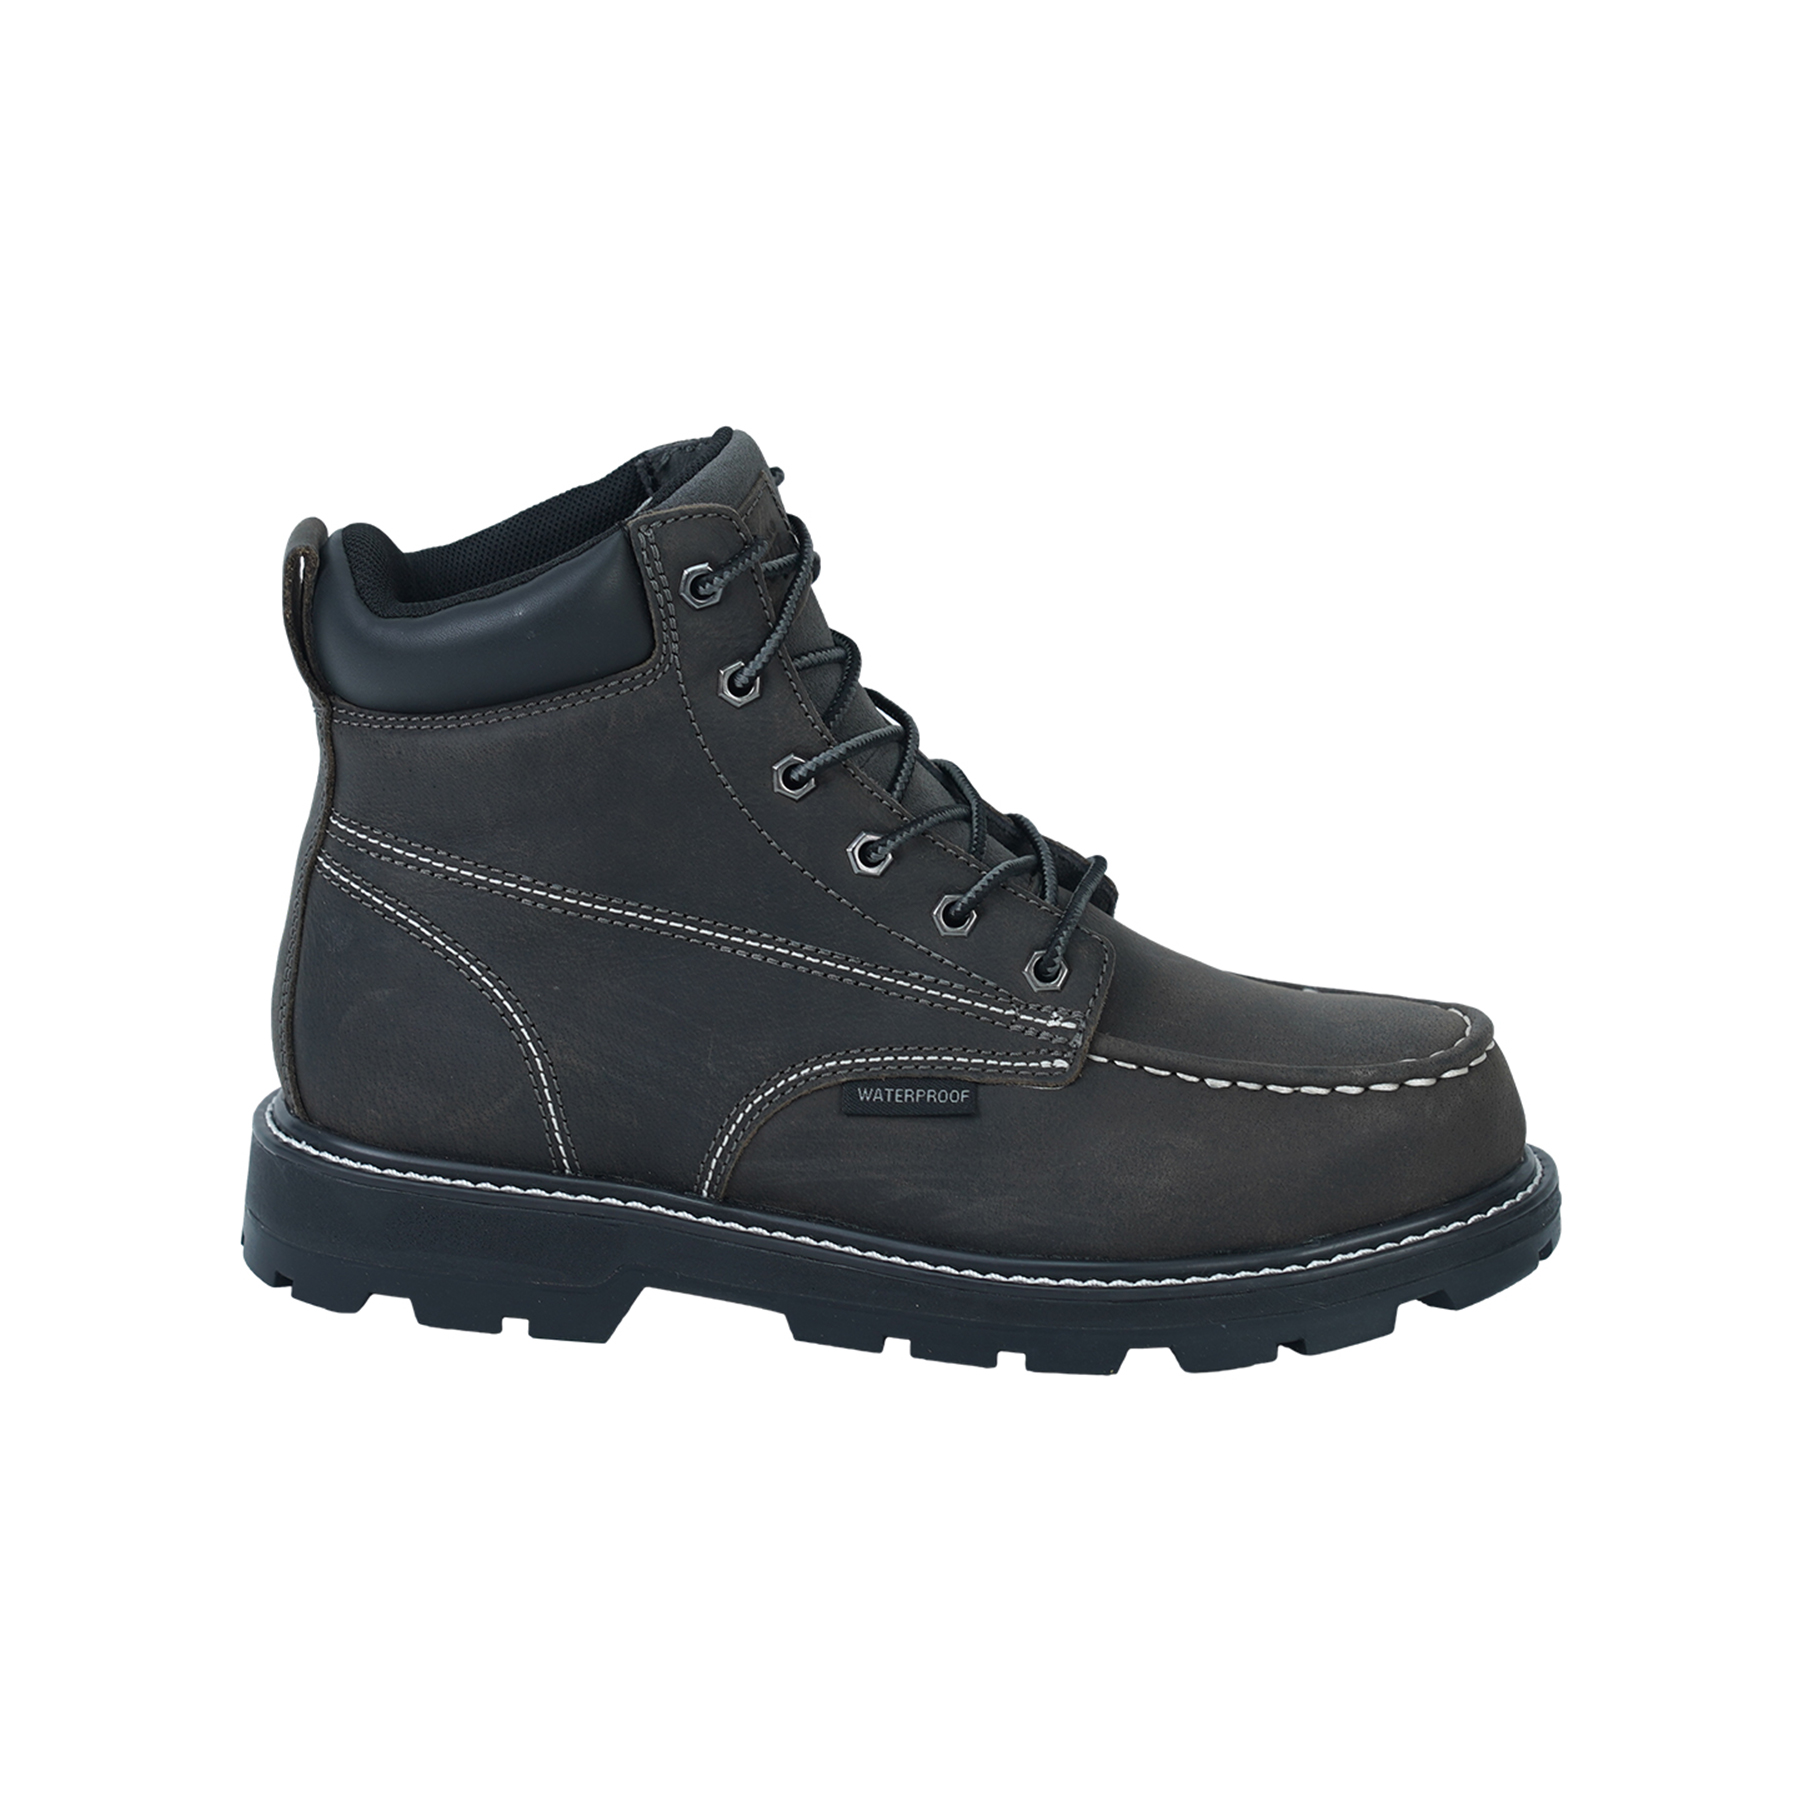 Seals Martin Shoes--Dark Grey, work shoes, steel toe boots, safety boots